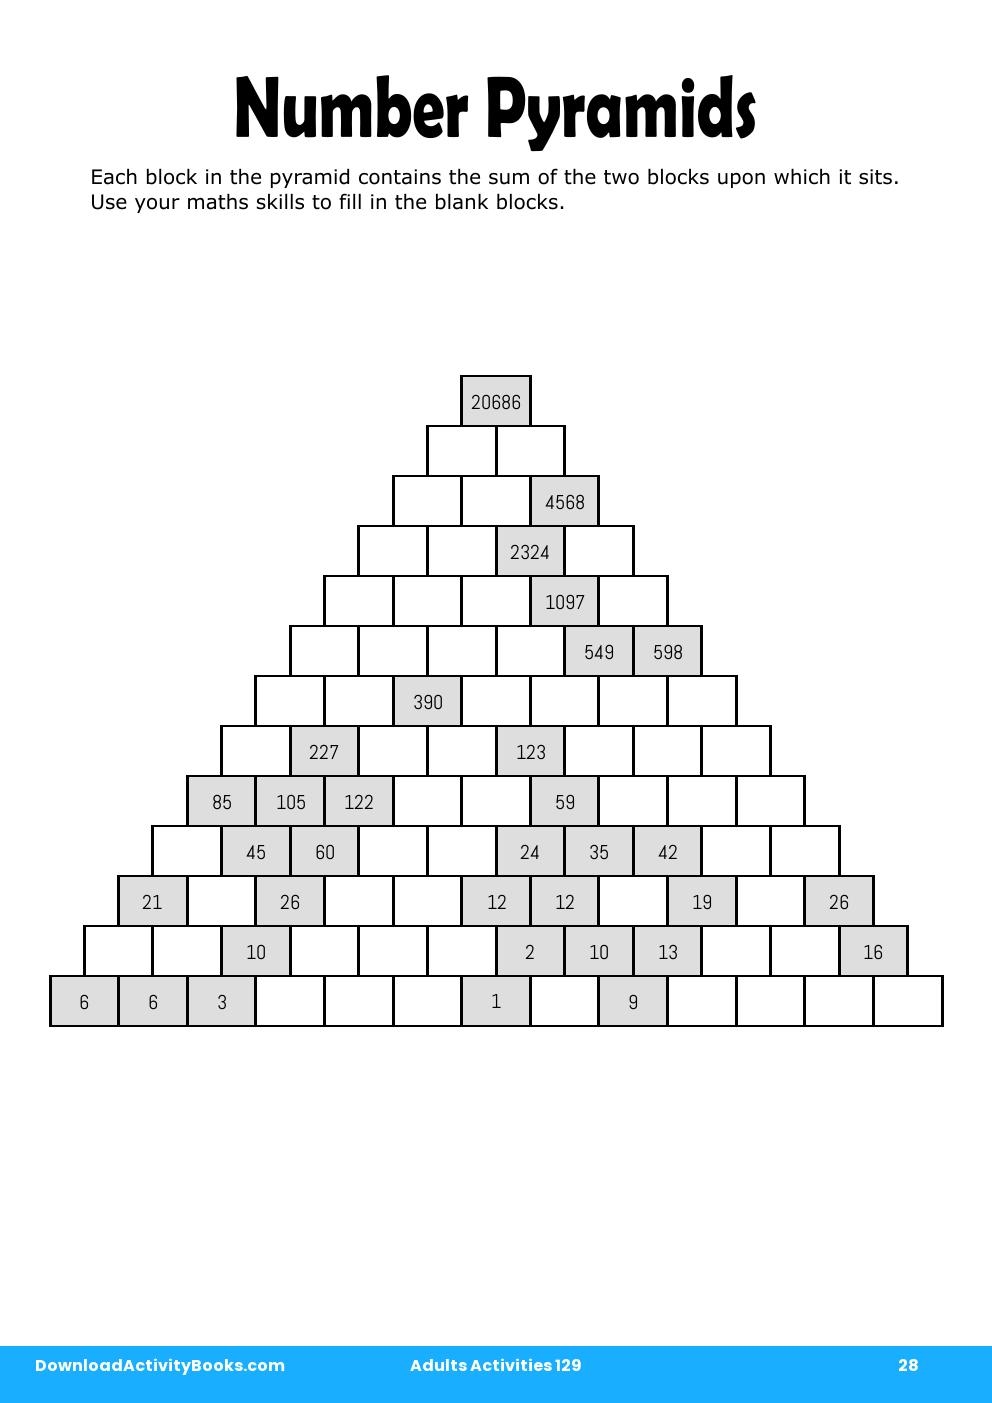 Number Pyramids in Adults Activities 129